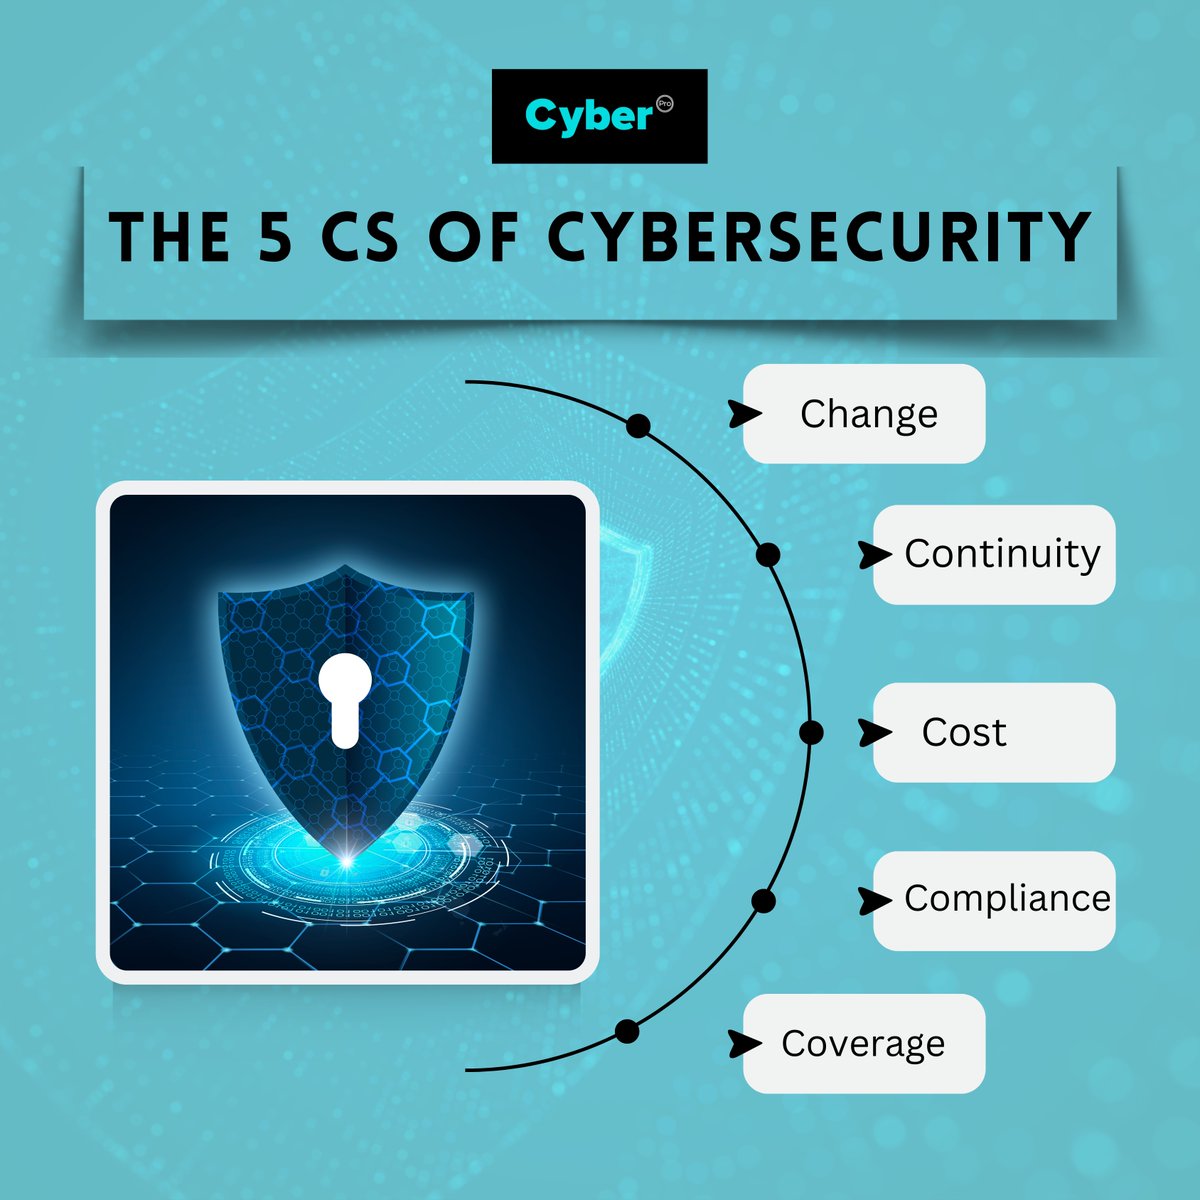 Unlocking the secret to a secure digital world! The 5 Cs of cybersecurity are here to keep you safe:

#Cybersecurity #SecurityMatters #DigitalProtection #StaySafeOnline #CyberAwareness #SecureYourWorld #OnlineSafety #CyberDefense #ProtectYourData #DigitalResilience #CyberSmart